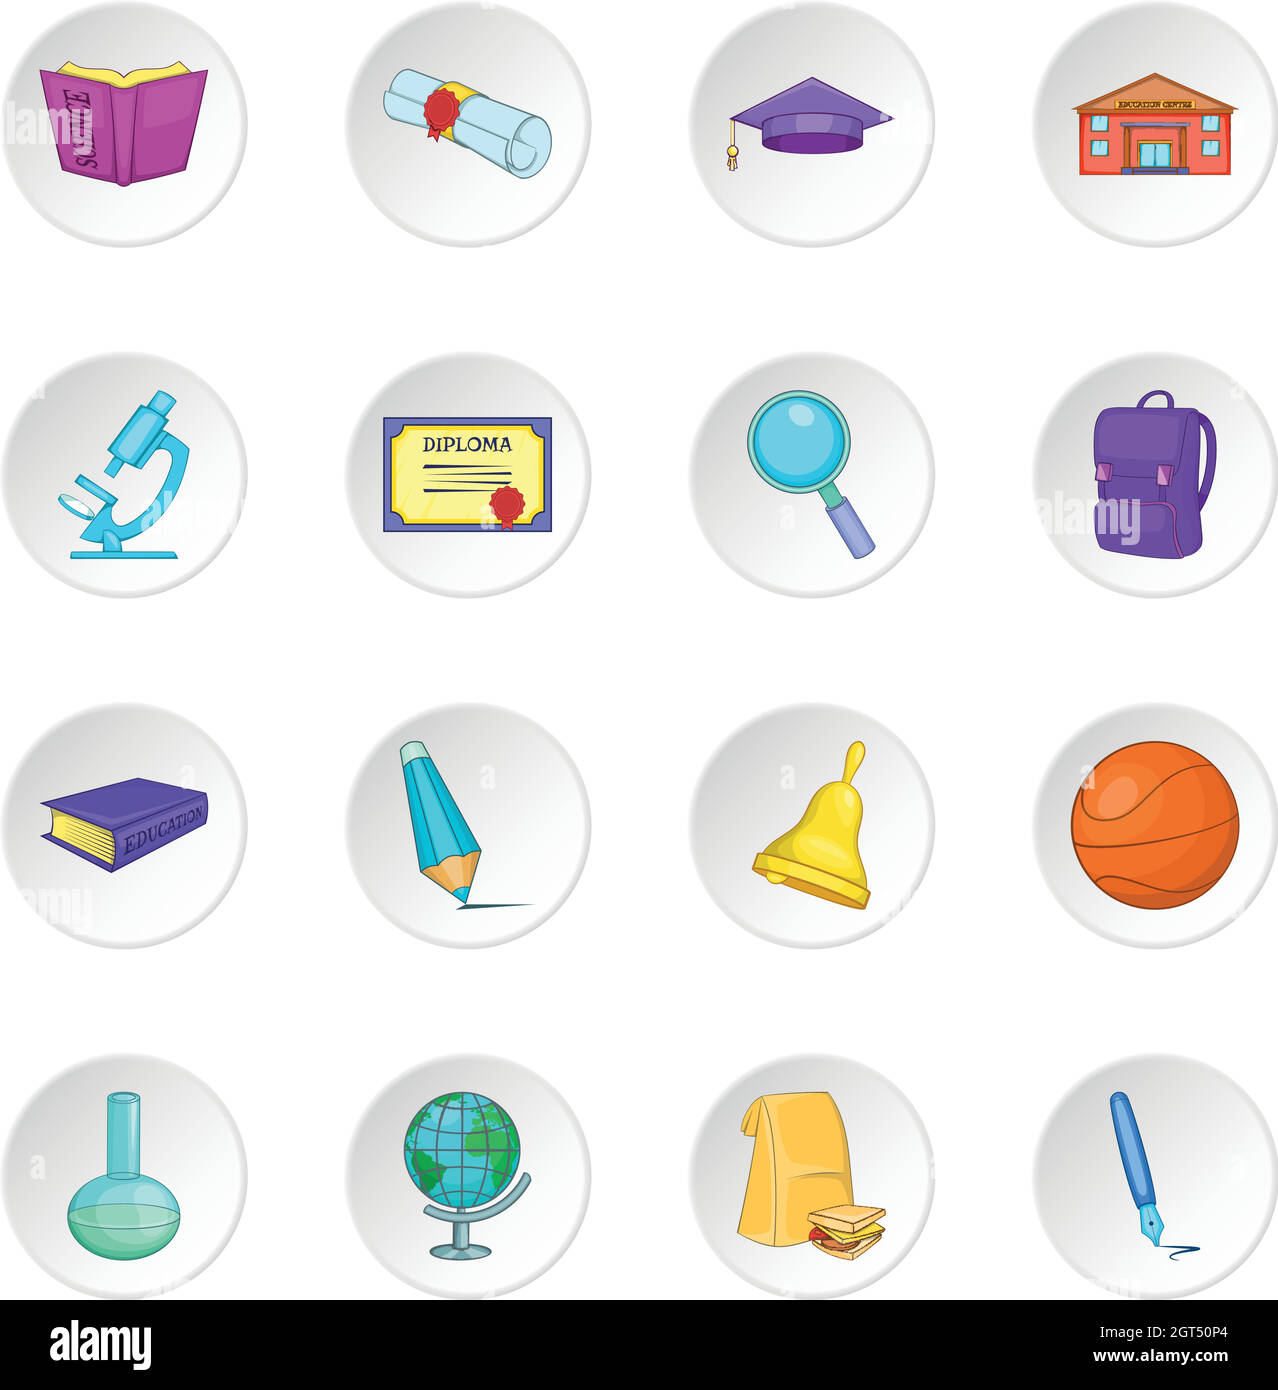 Education icons set Stock Vector